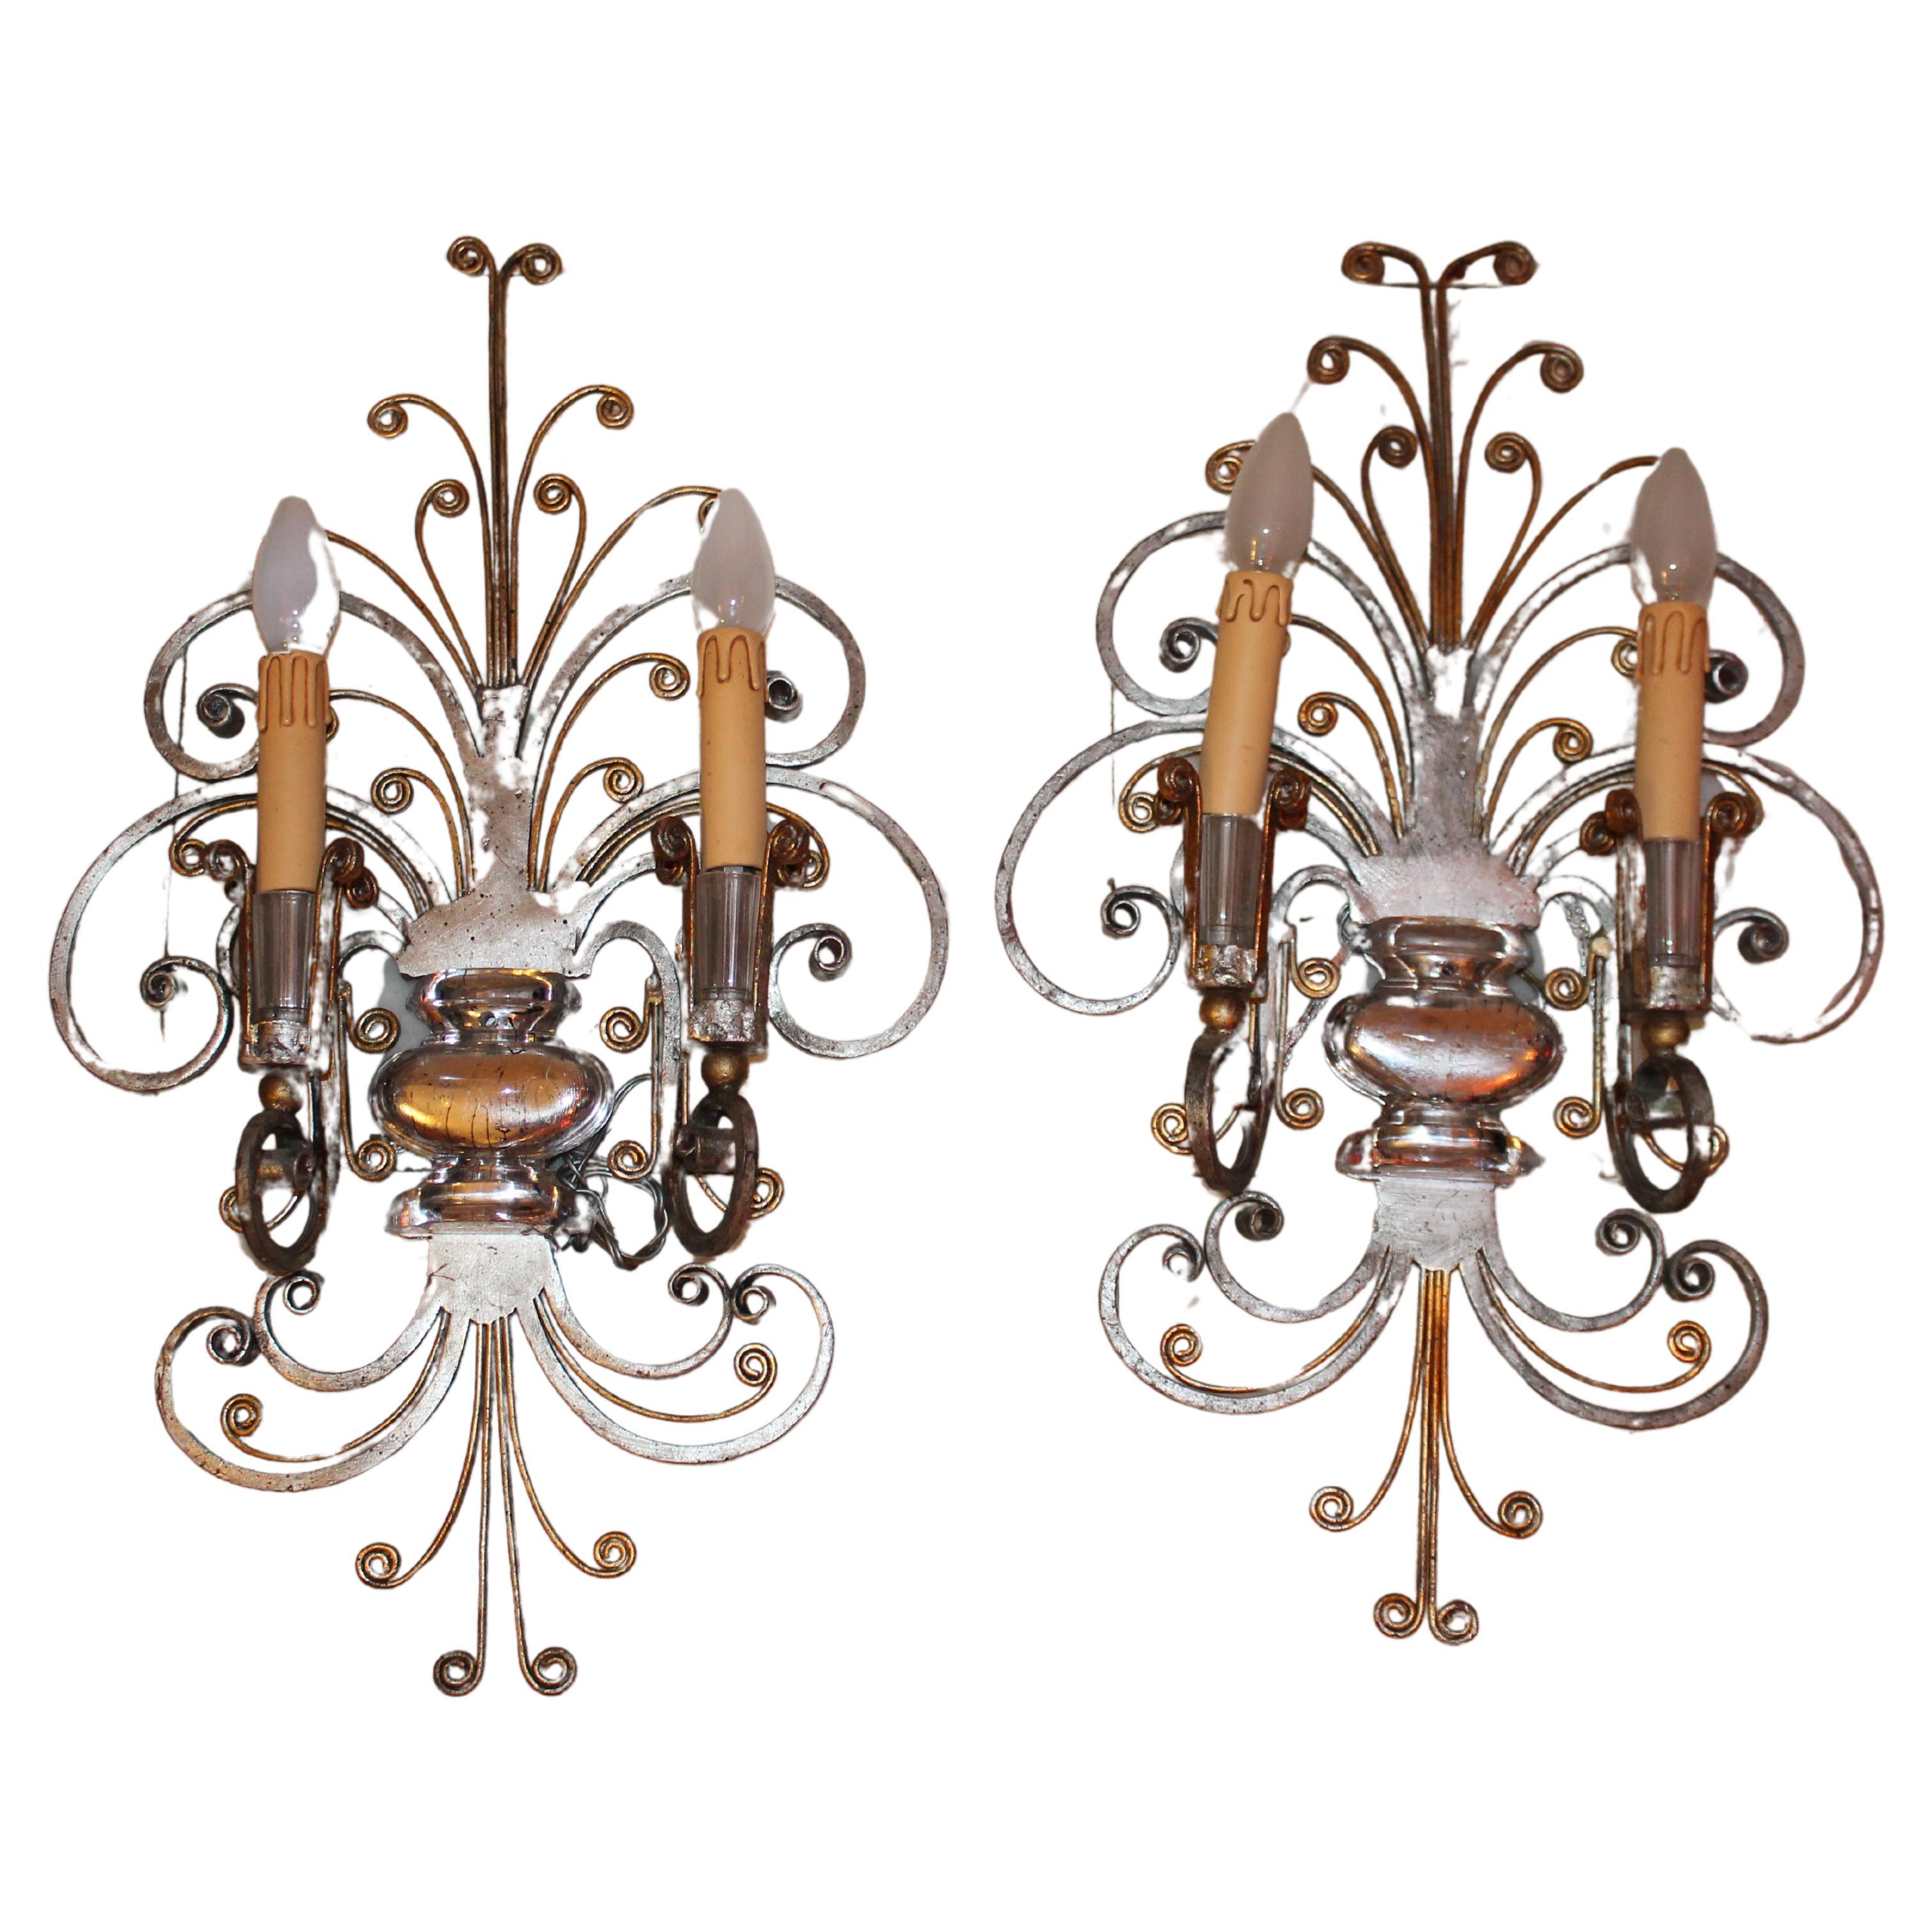 Pair French Art Deco Scrolled Gilt/ Silver Steel Maison Bagues Wall Sconces  For Sale